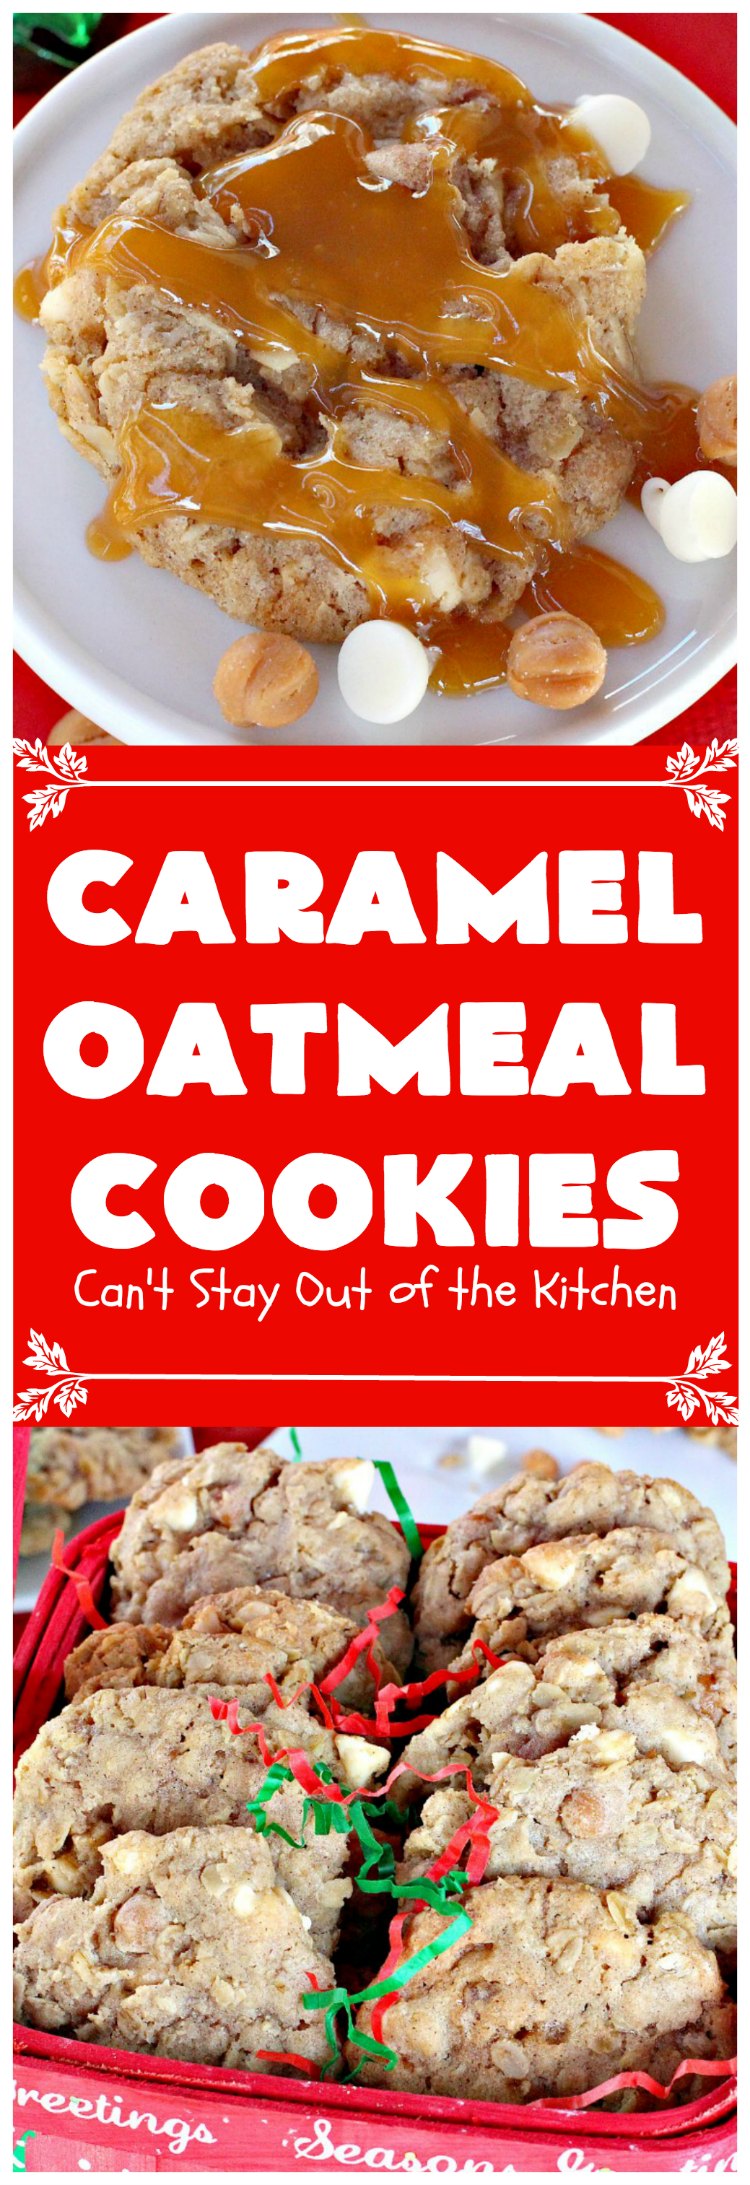 Caramel Oatmeal Cookies | Can't Stay Out of the Kitchen